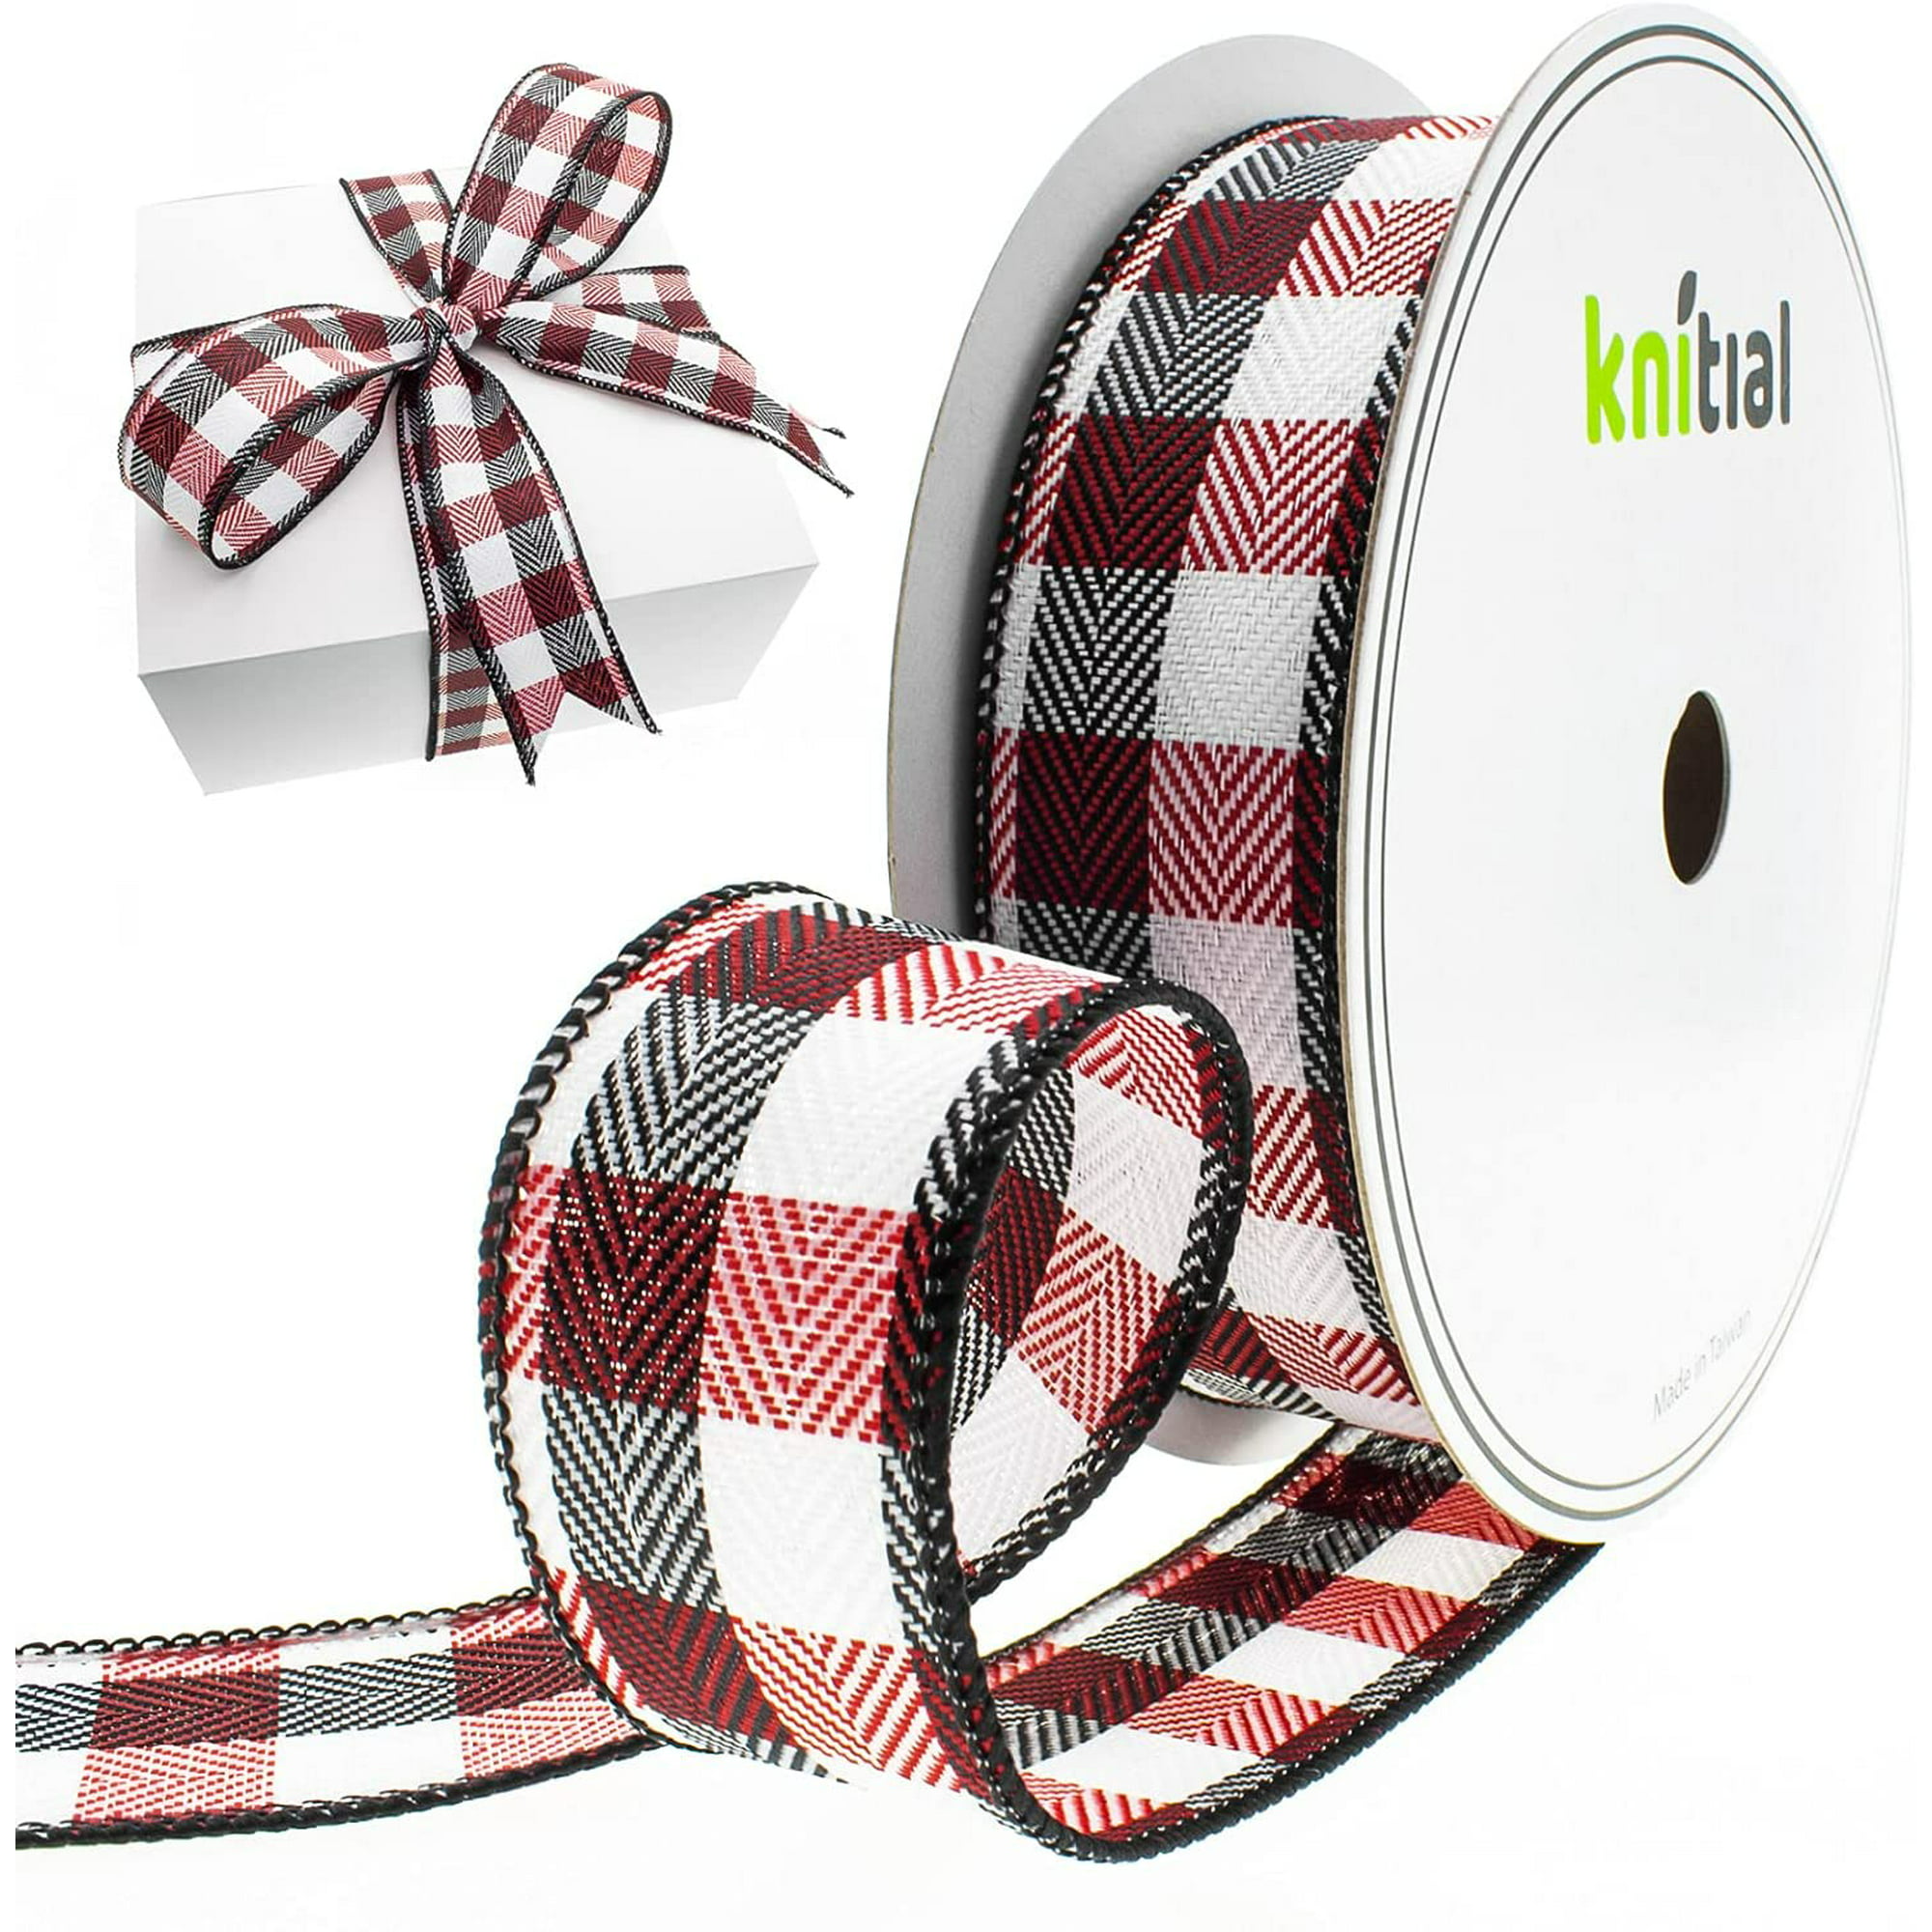 Wired Buffalo Plaid Ribbon 1-1/2 Inches x 25 Yards Light Red, Black, and  White Multicolor Buffalo Check Ribbon for Gift Wrapping, Crafts, and 